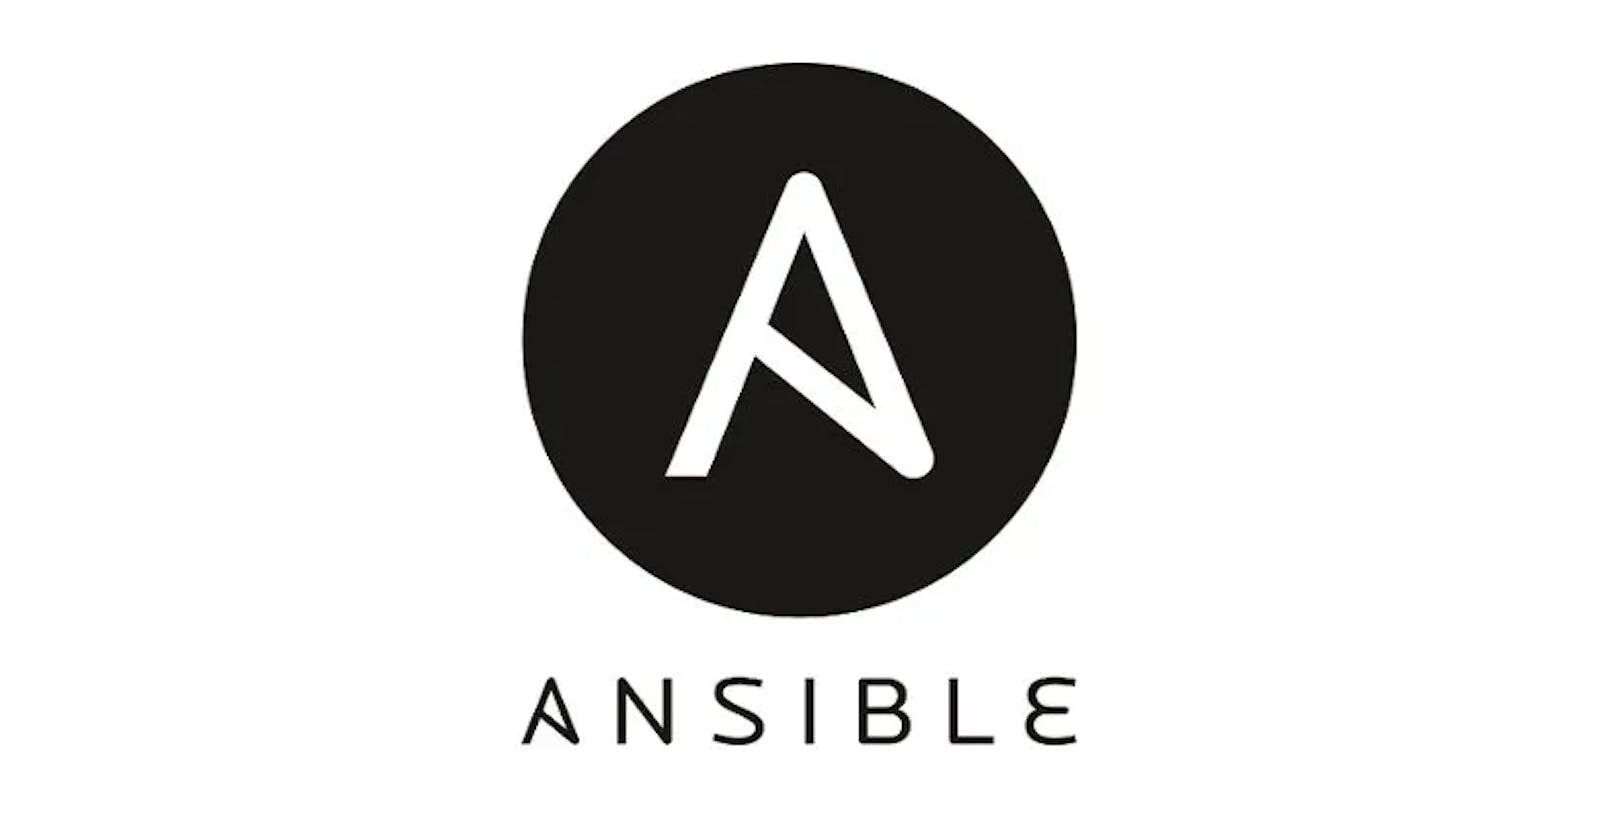 How to make changes in a group of nodes using Ansible?